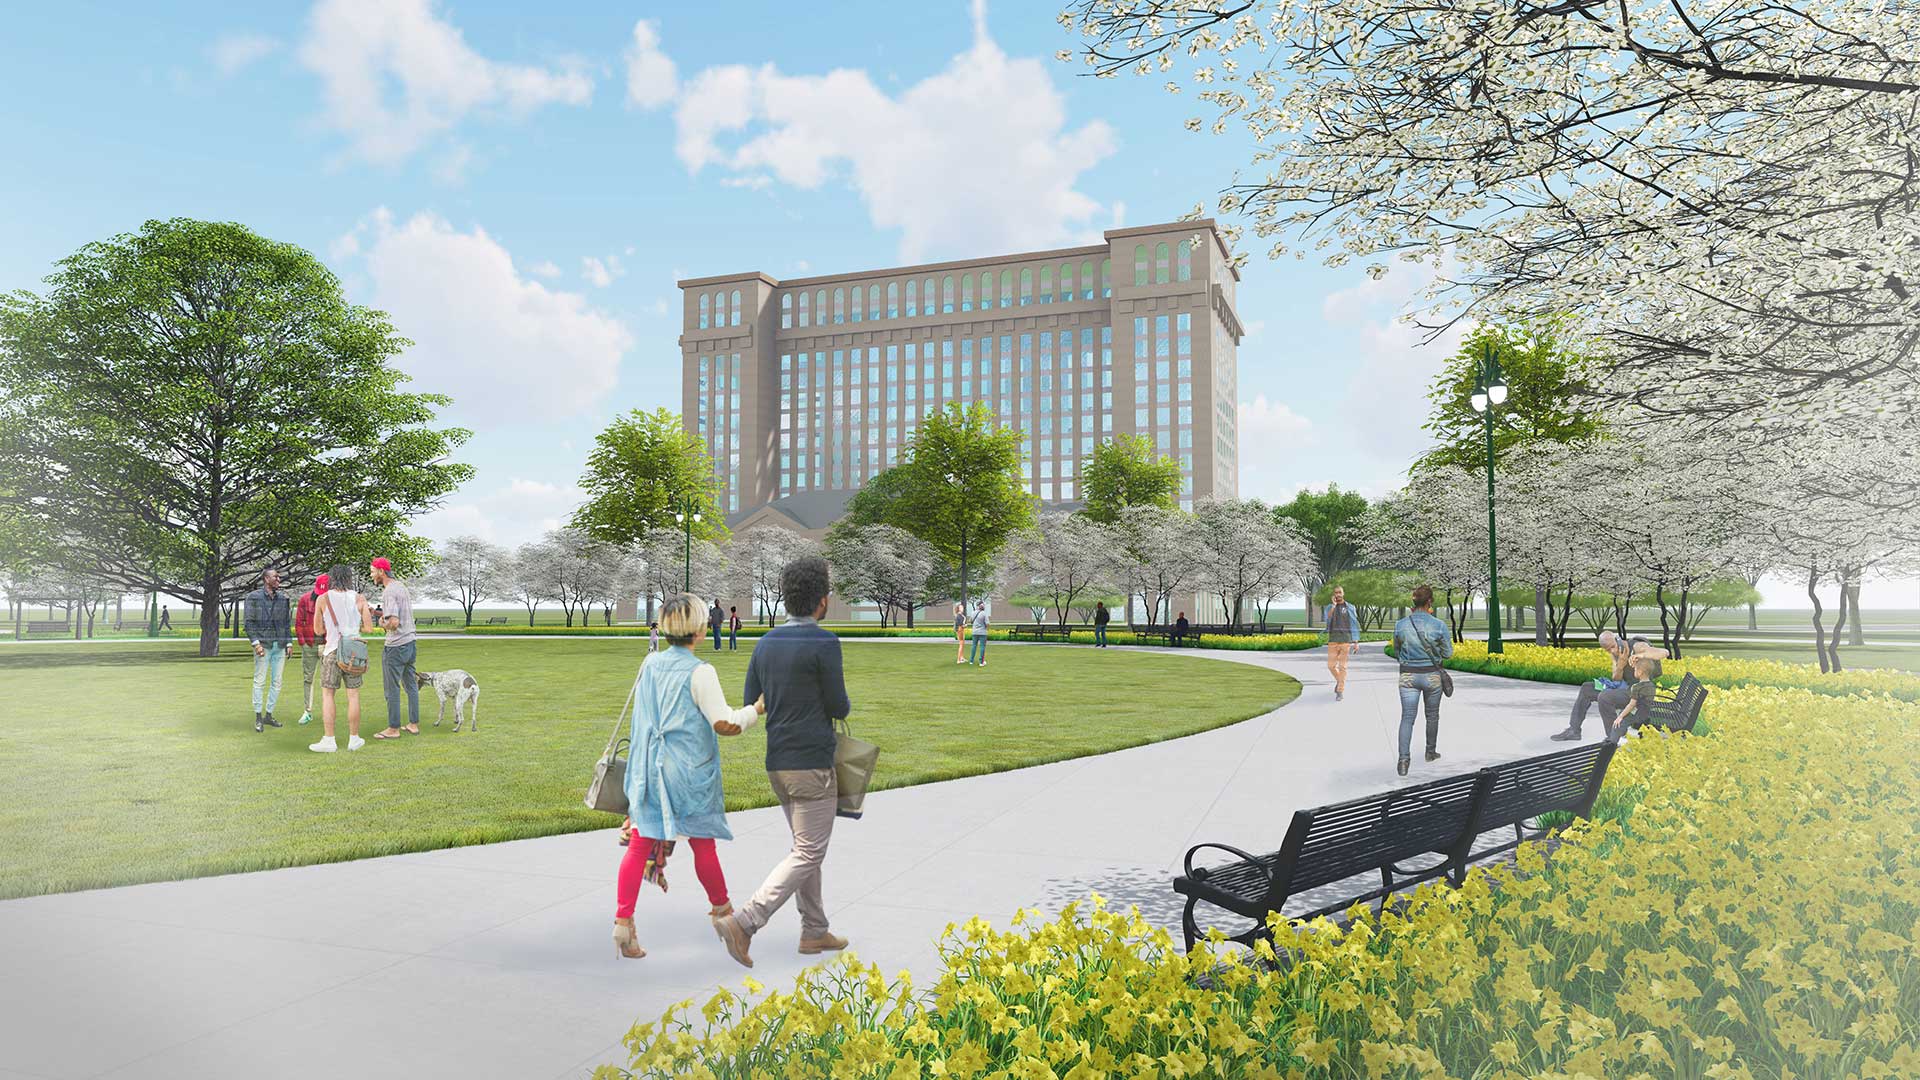 rendering of a park with detroit's michigan central station in the distance